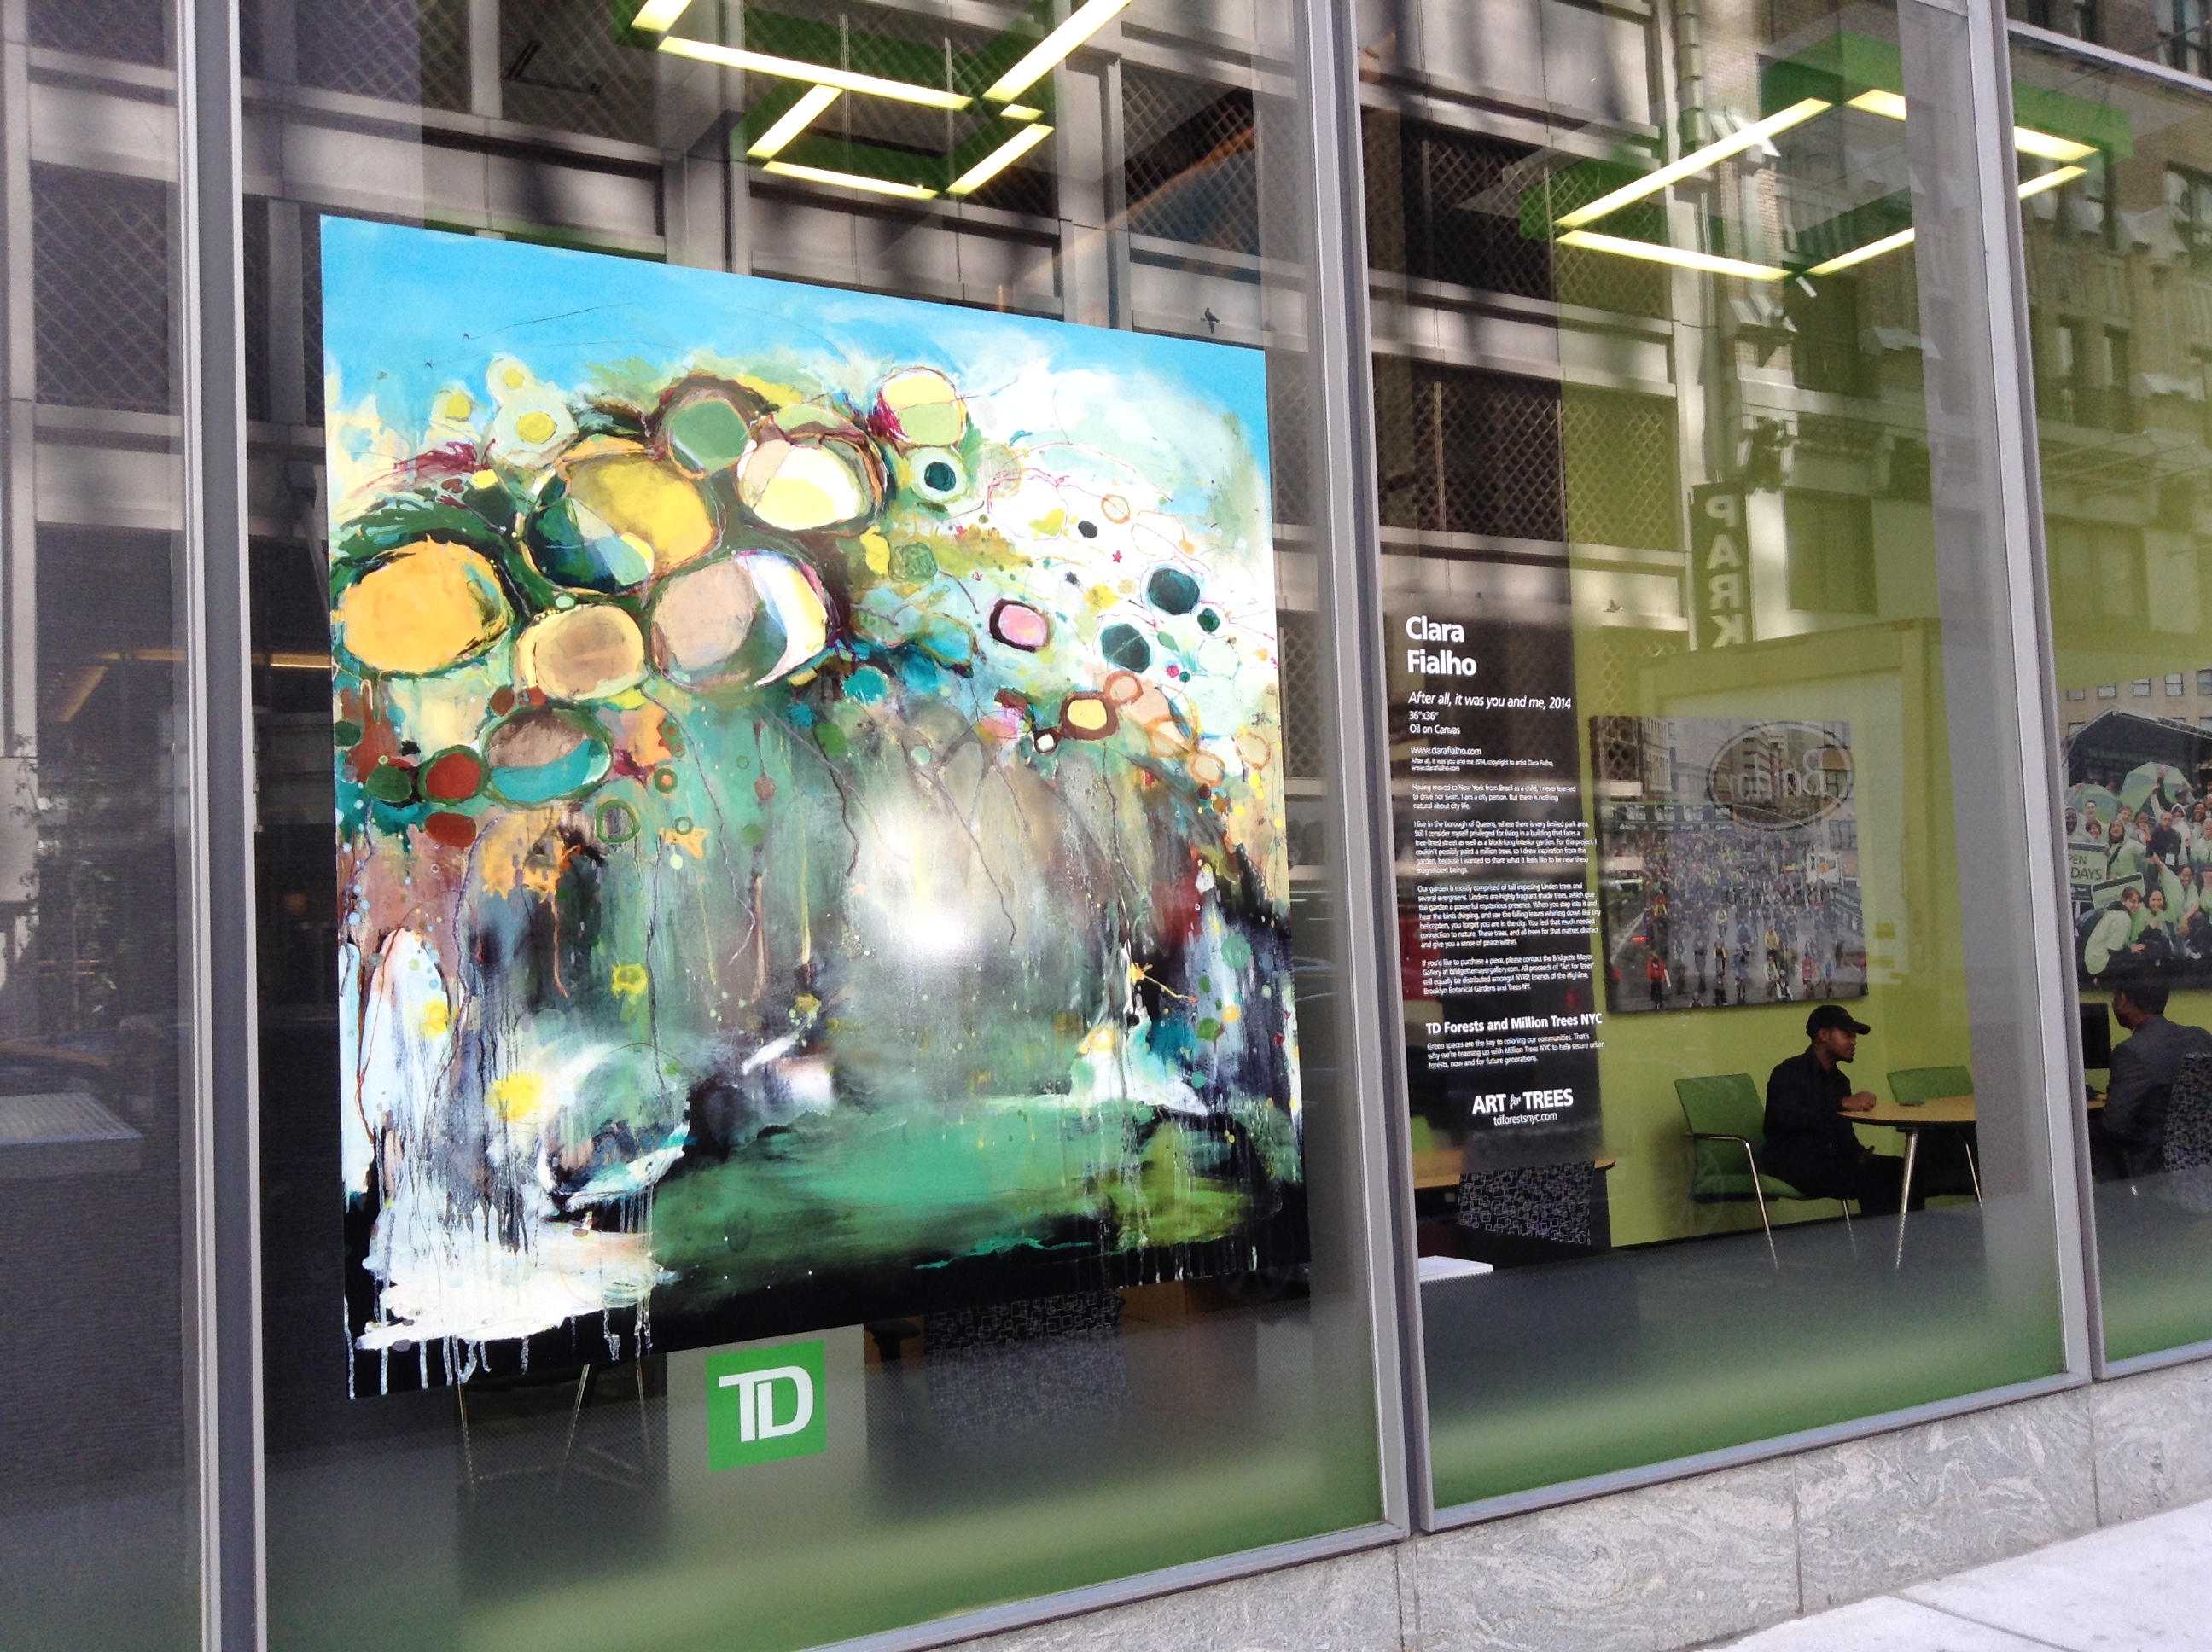 Roll out to for TD Bank windows, Art For Trees promotion using local artists